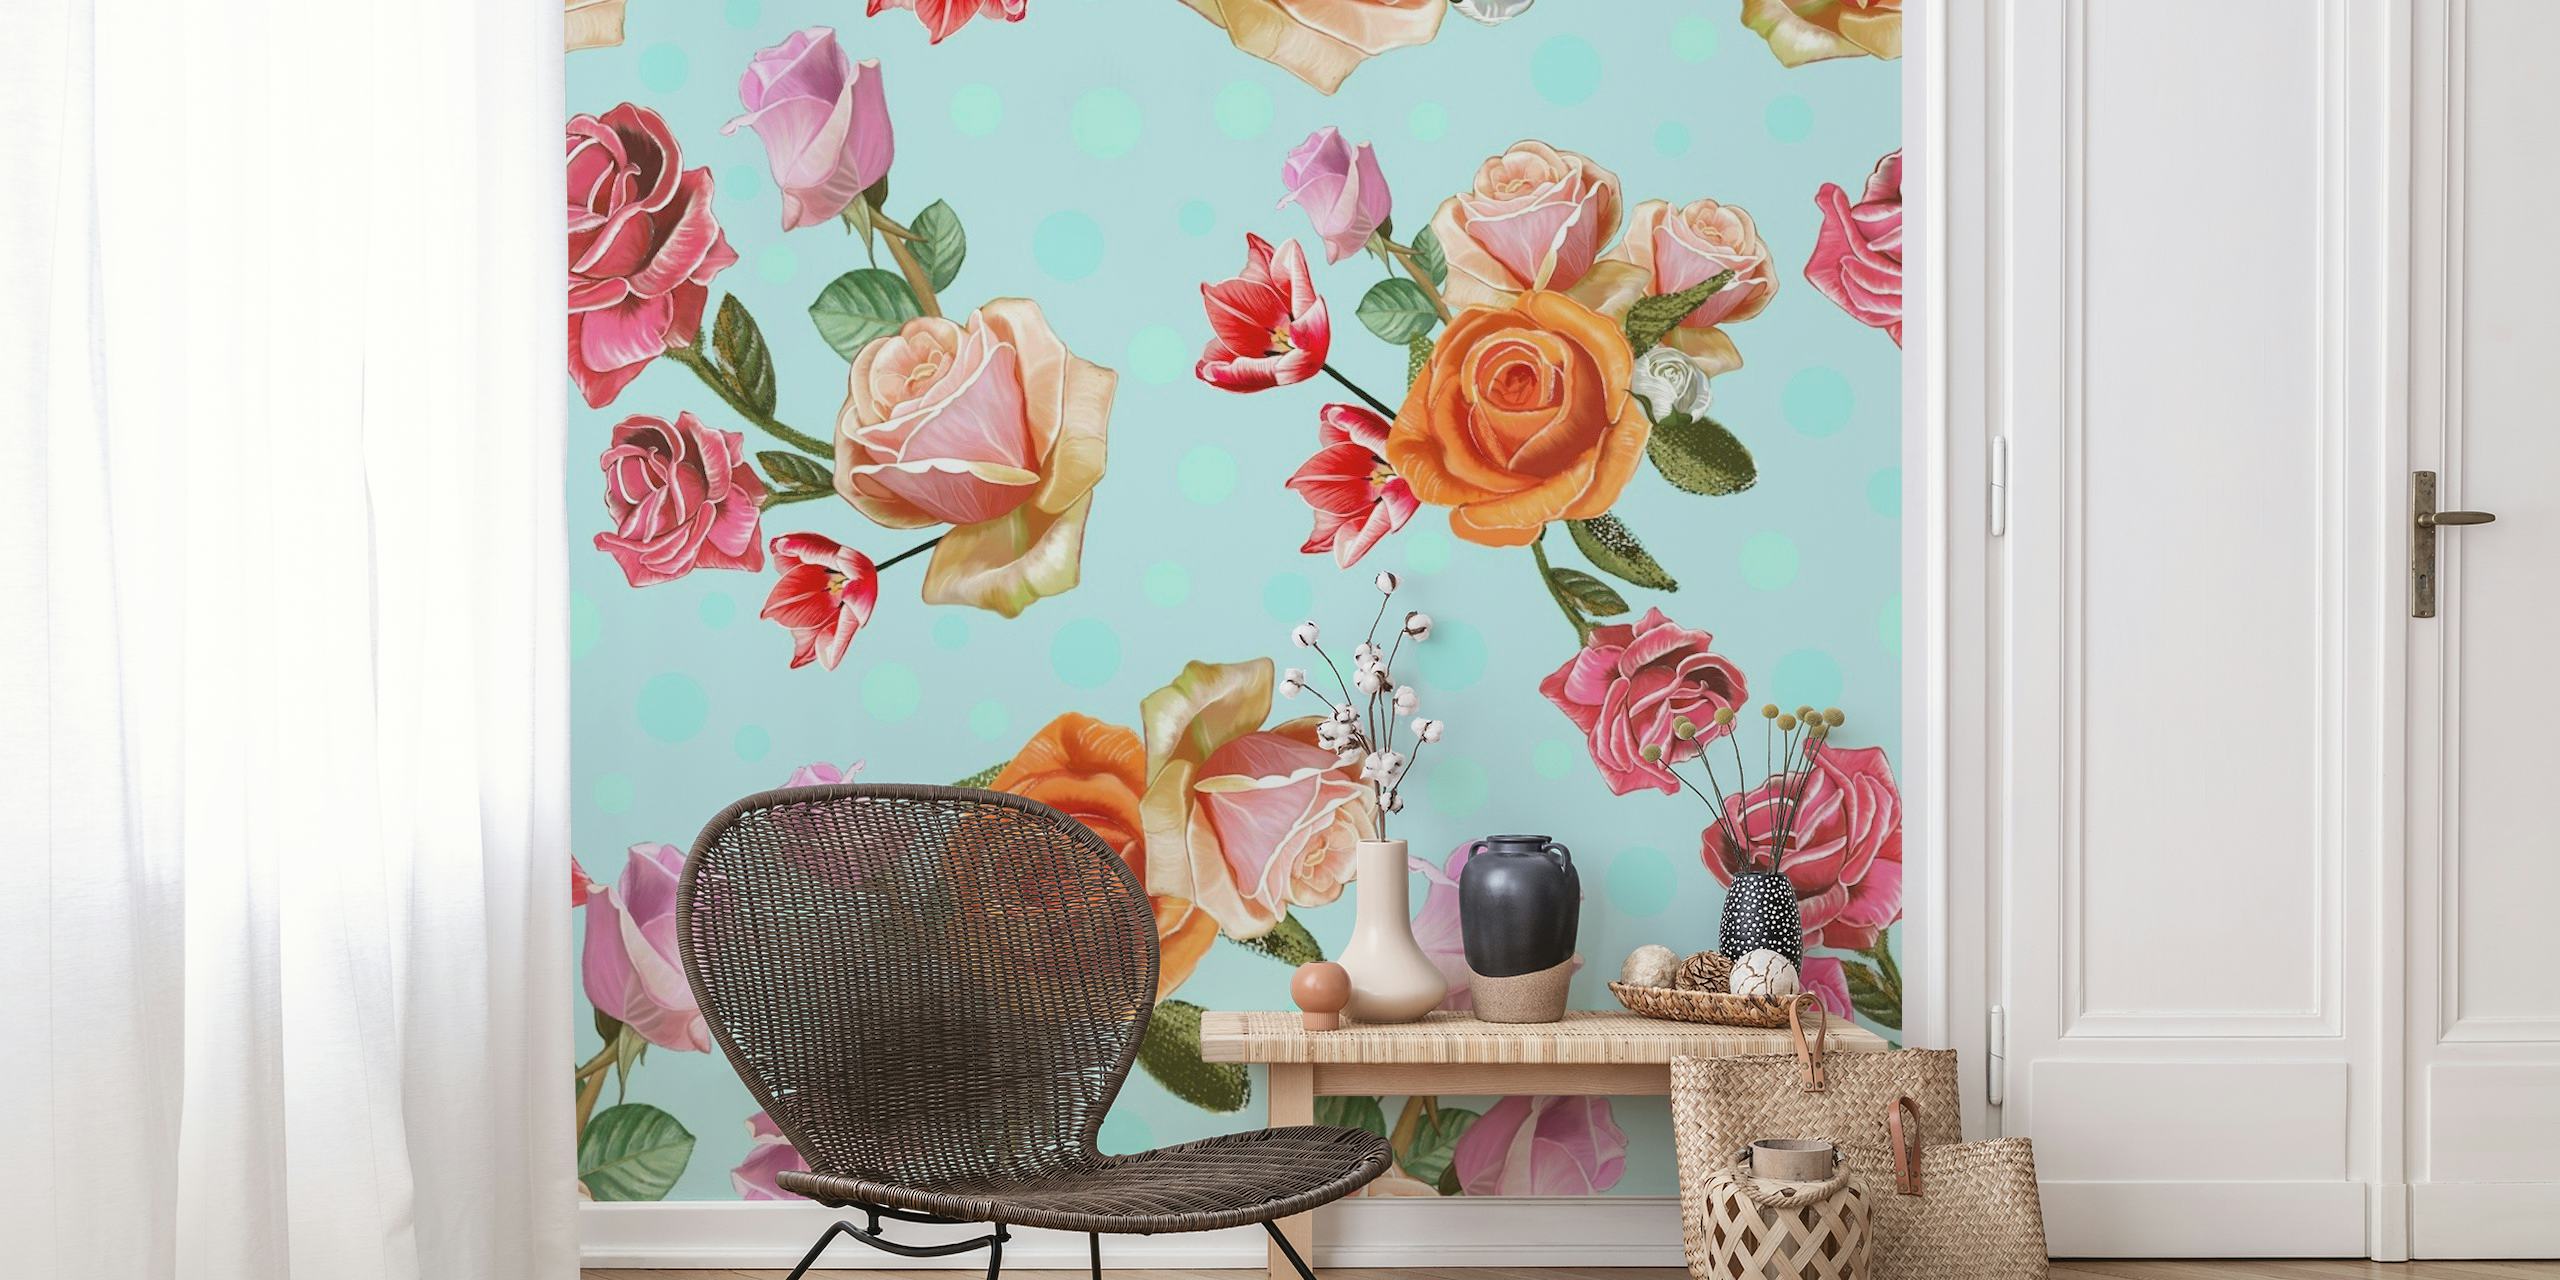 Heirloom roses and tulip wallpaper